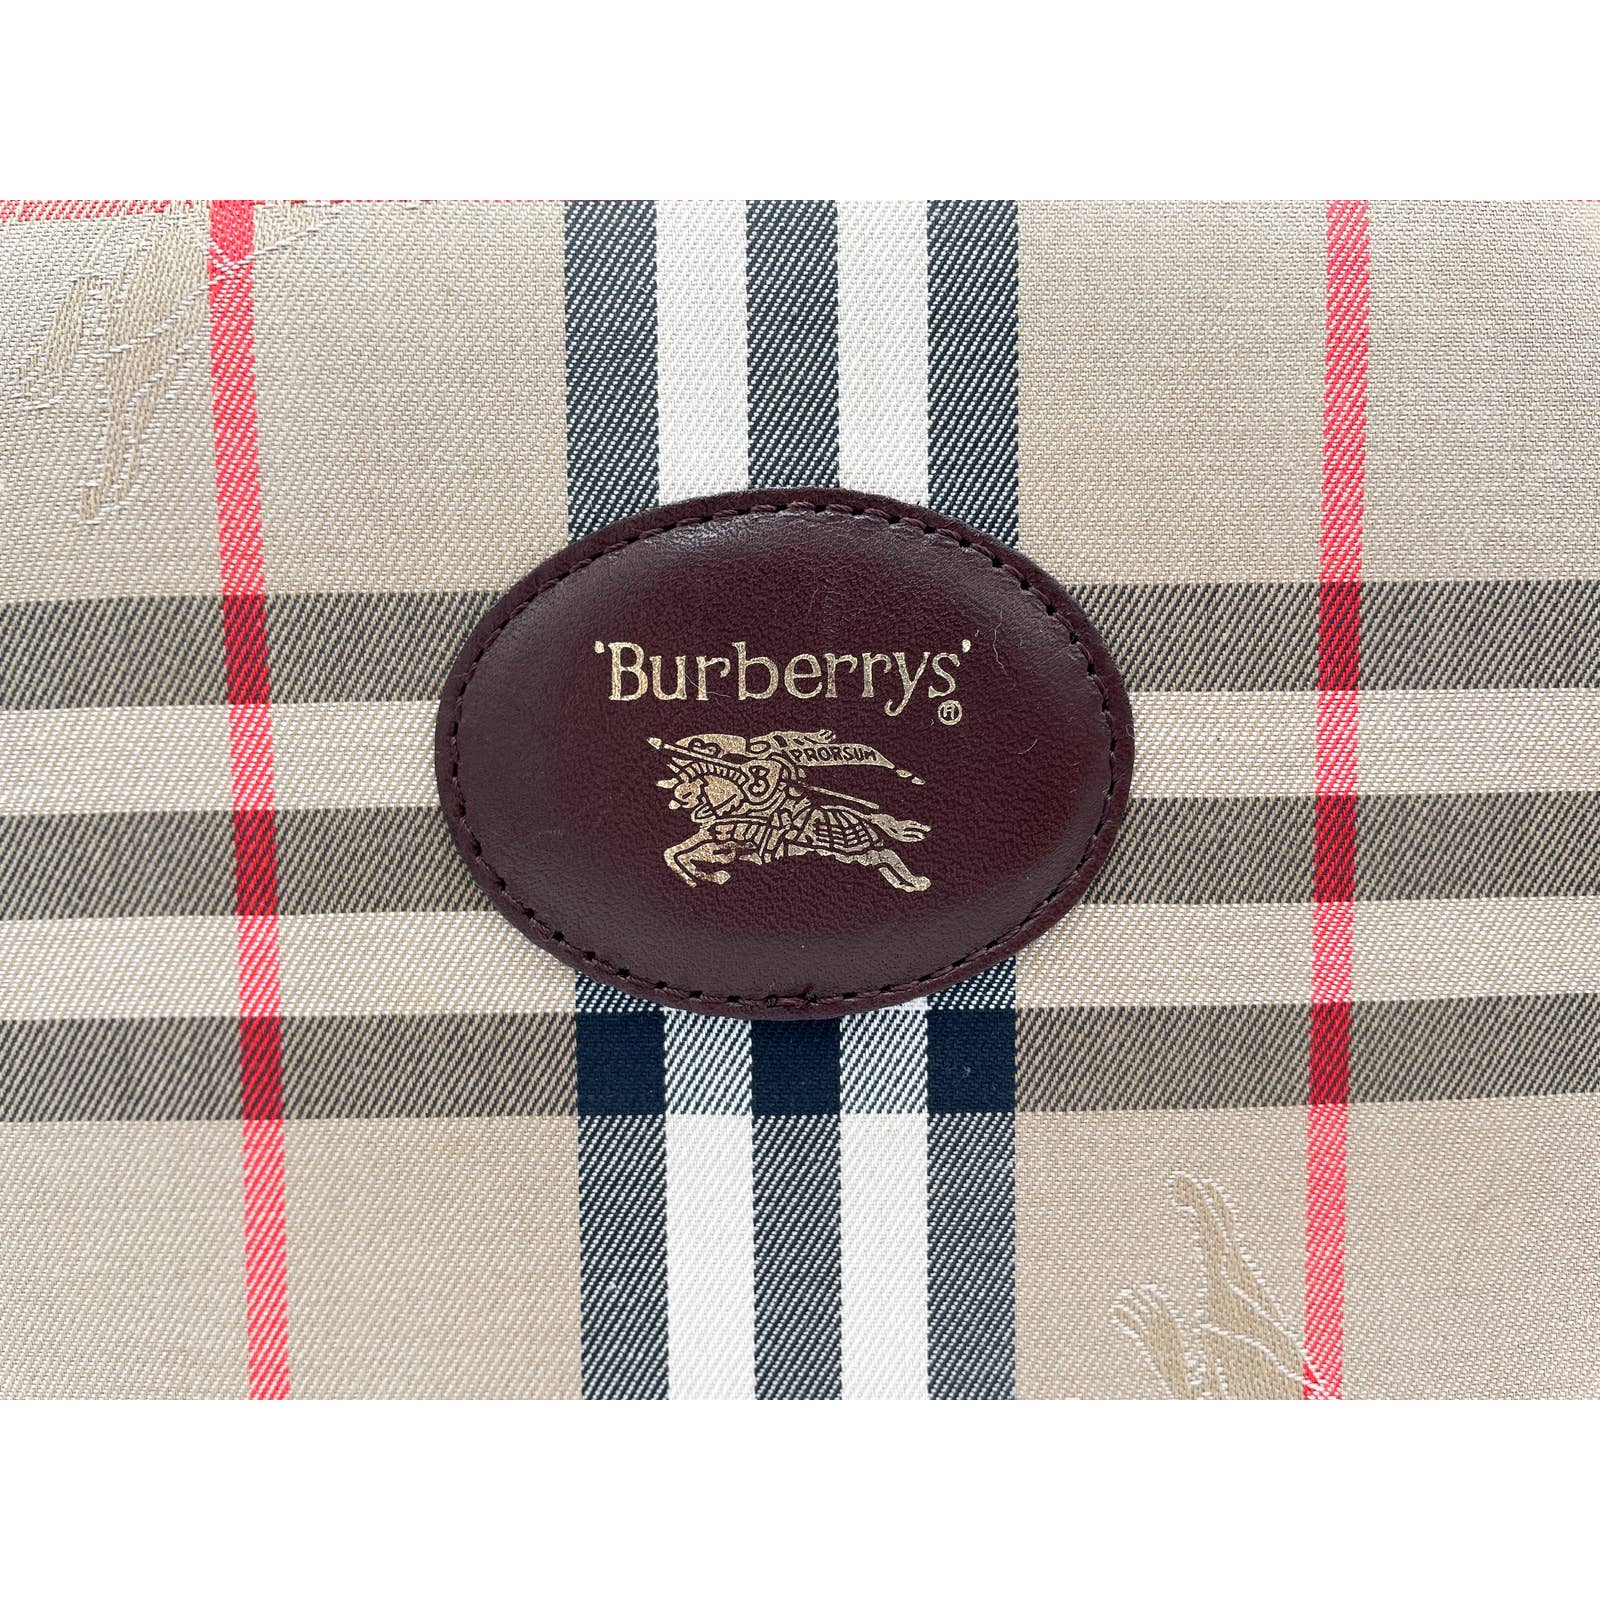 A close-up image of a beige fabric with a classic checkered pattern in red, black, and white, part of a Burberry Crossbody Bag. At the center, there's a brown leather oval patch with the text "Burberrys" and a knight logo embossed in gold.